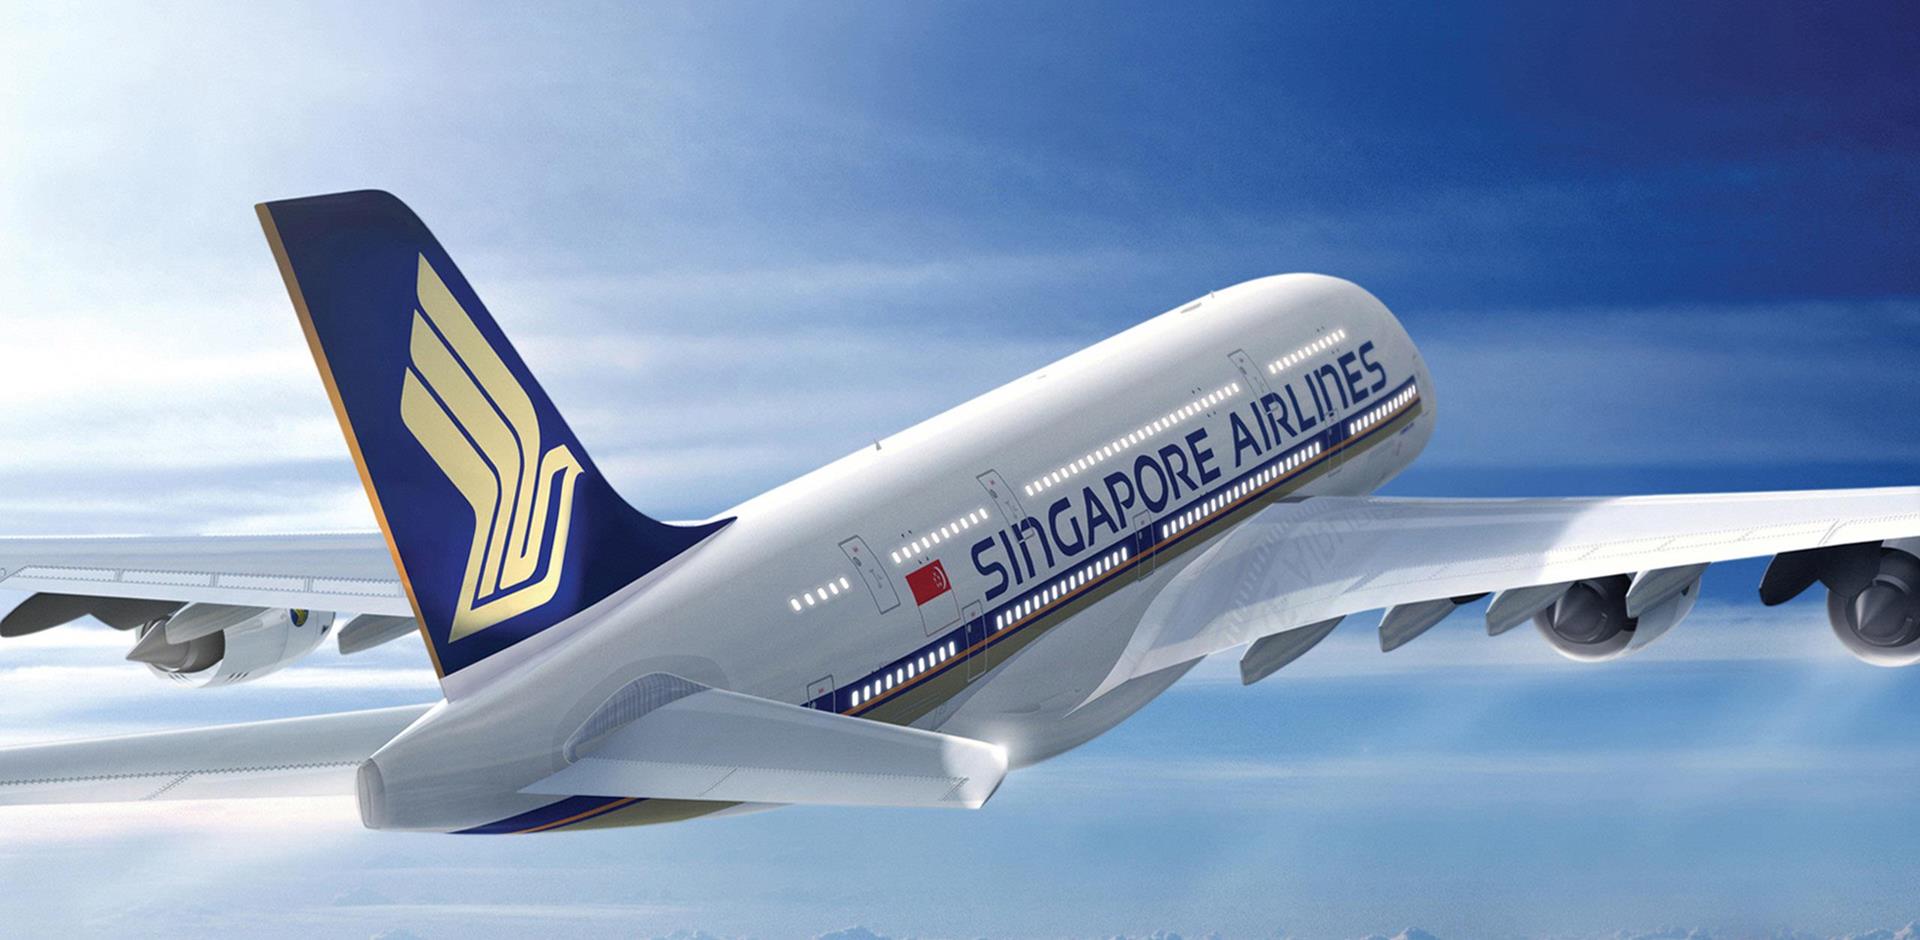 A&K, Singapore Airlines